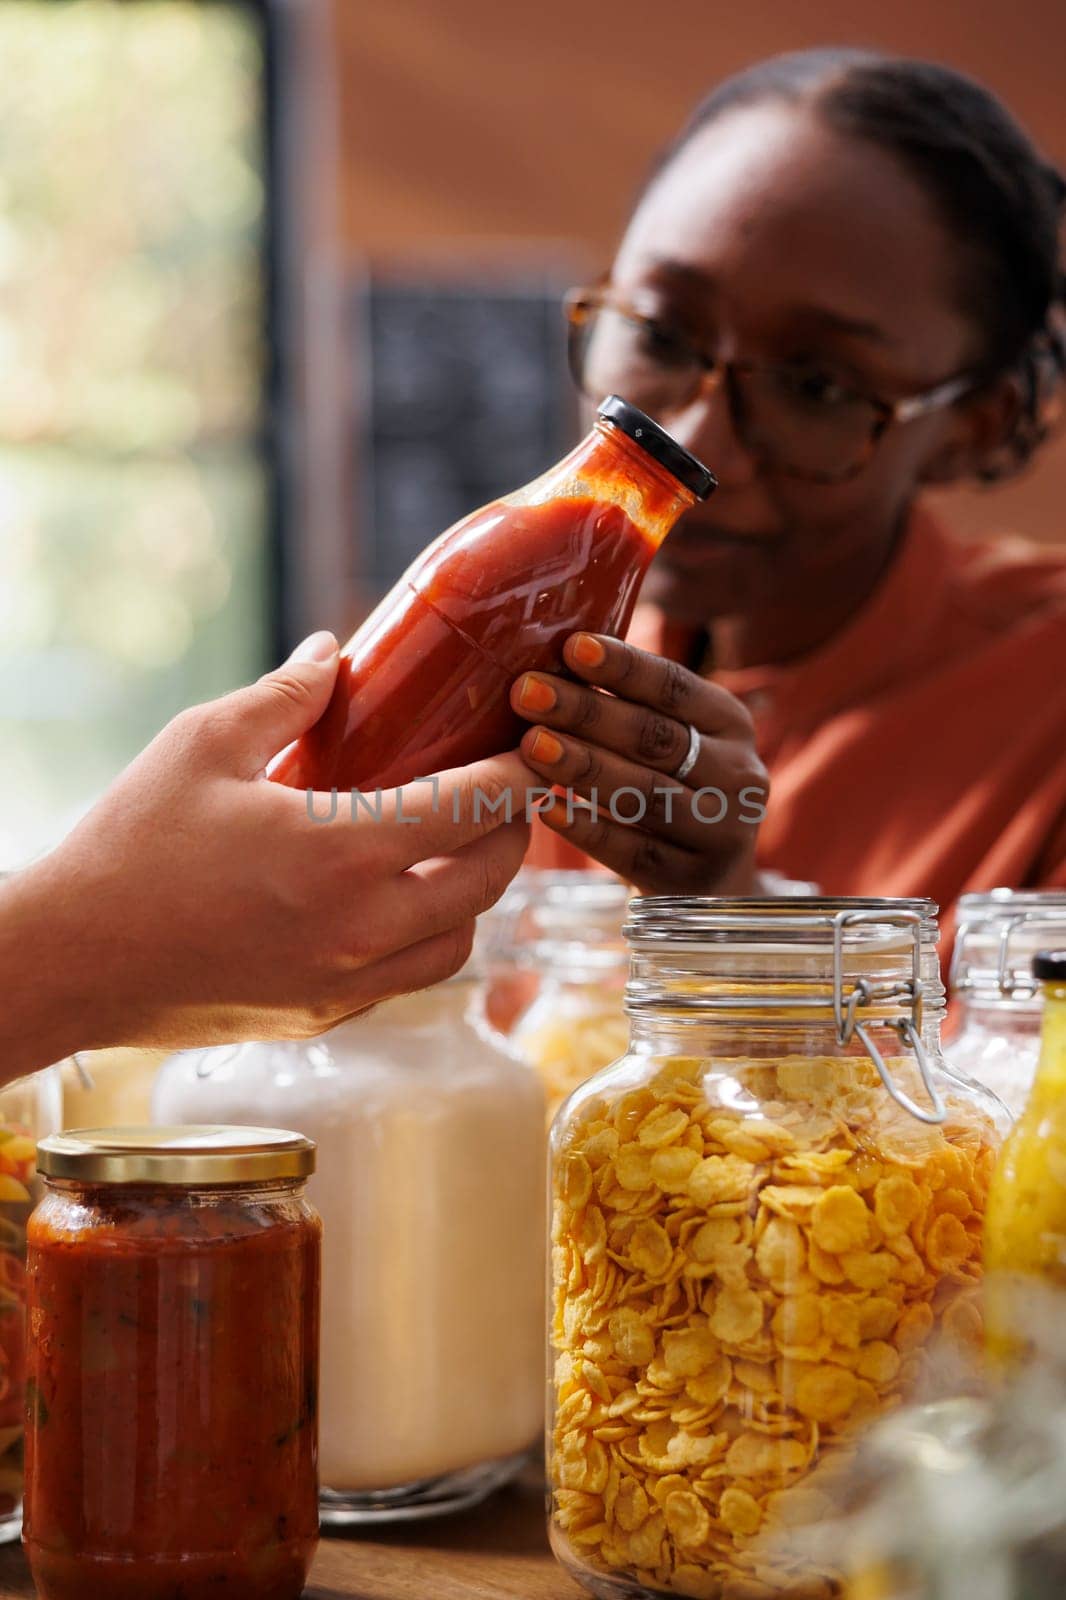 Customer shopping for vegan sustainable food items in a zero waste shop with vendor providing information. Environmentally friendly woman analyzing homemade sauces ideal for healthy eating.